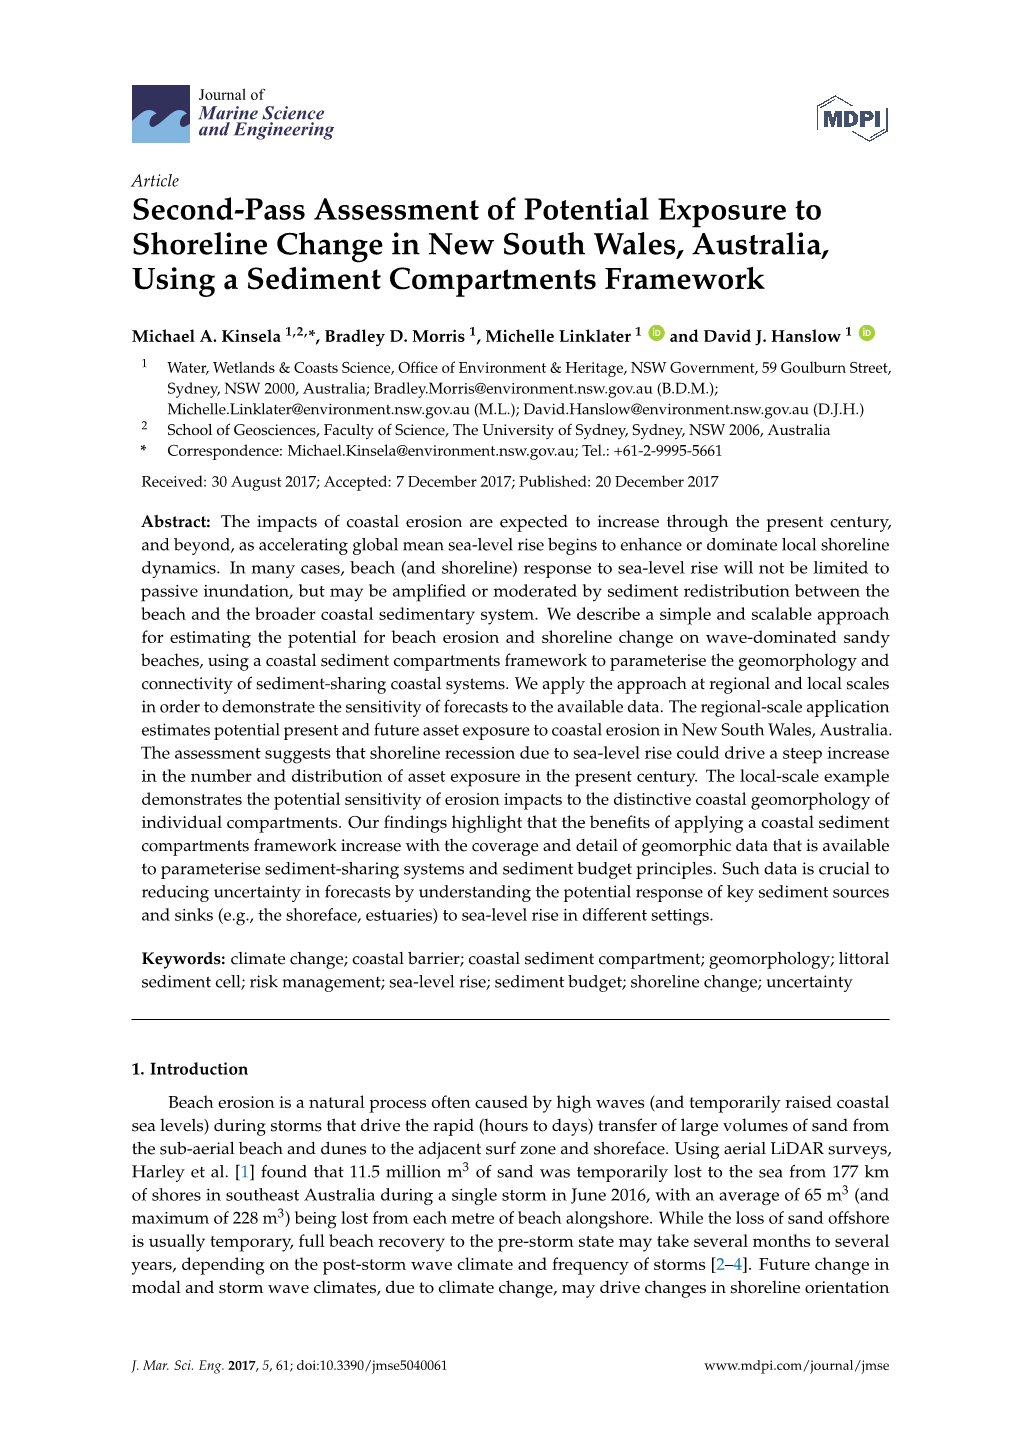 Second-Pass Assessment of Potential Exposure to Shoreline Change in New South Wales, Australia, Using a Sediment Compartments Framework